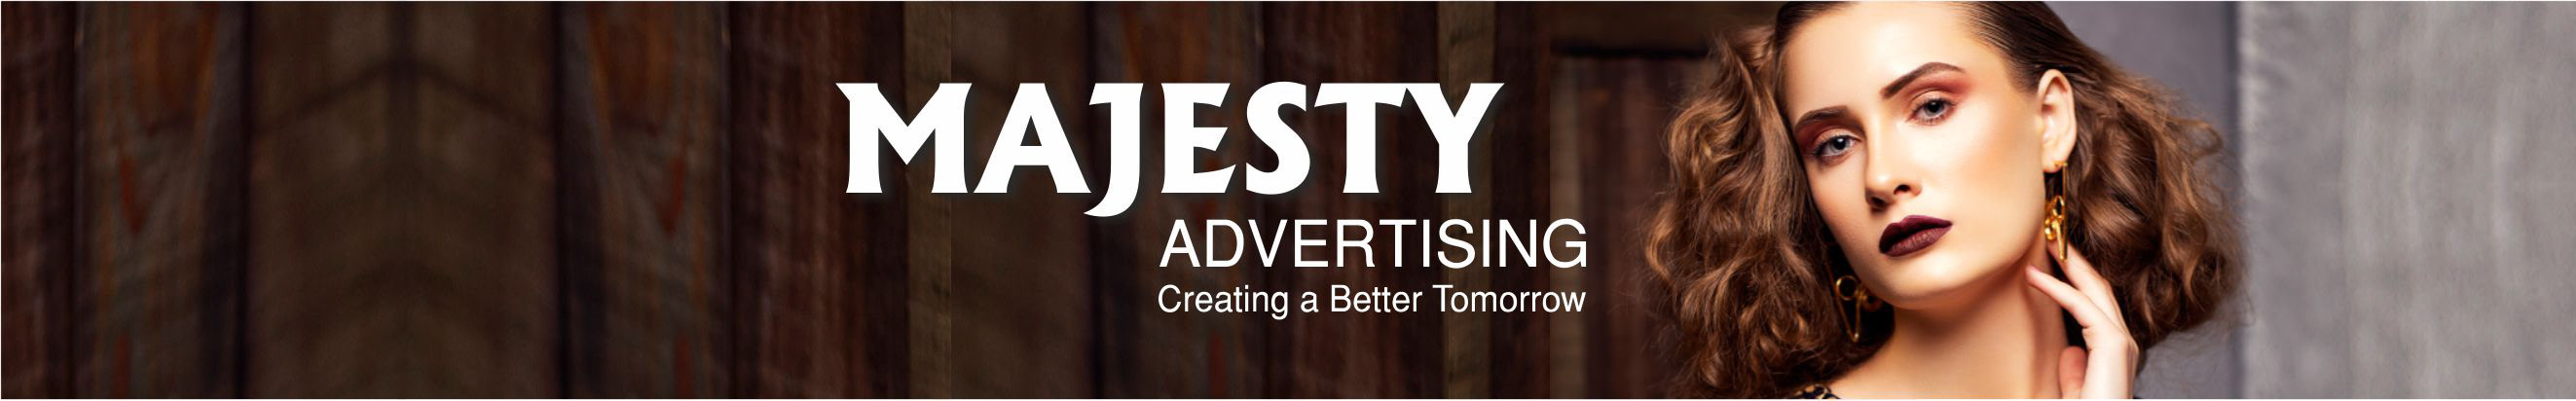 Majesty Advertising's profile banner